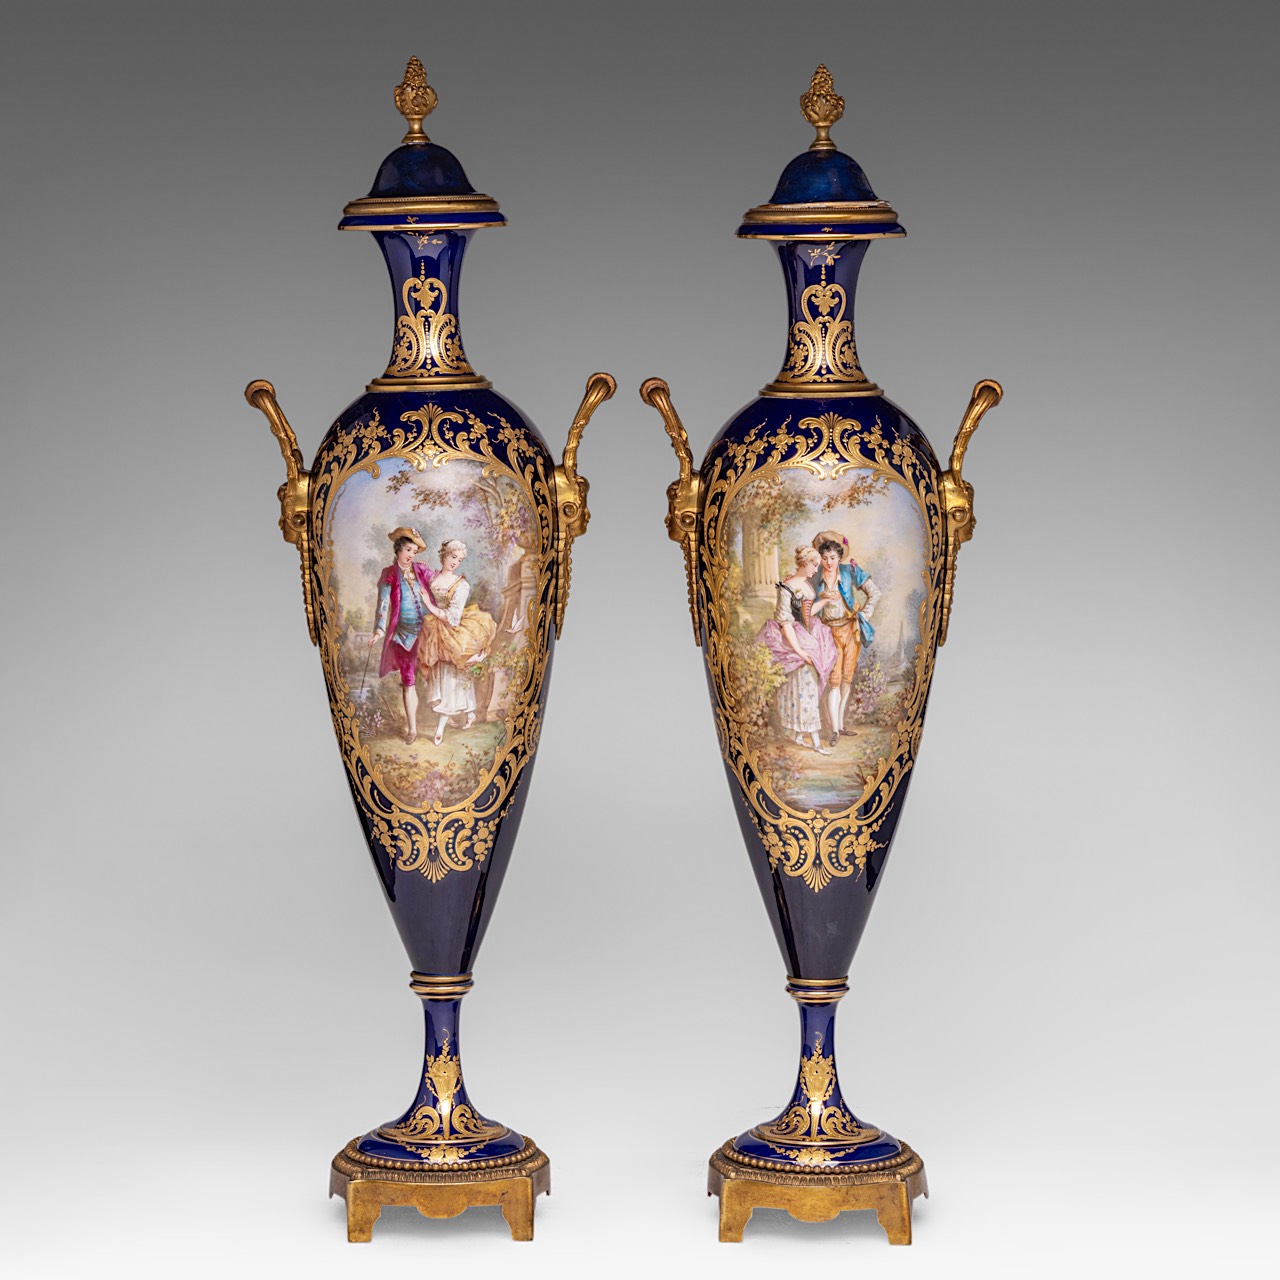 An pair of Sevres vases, with gallant scenes and gilt brass mounts, H 65 cm